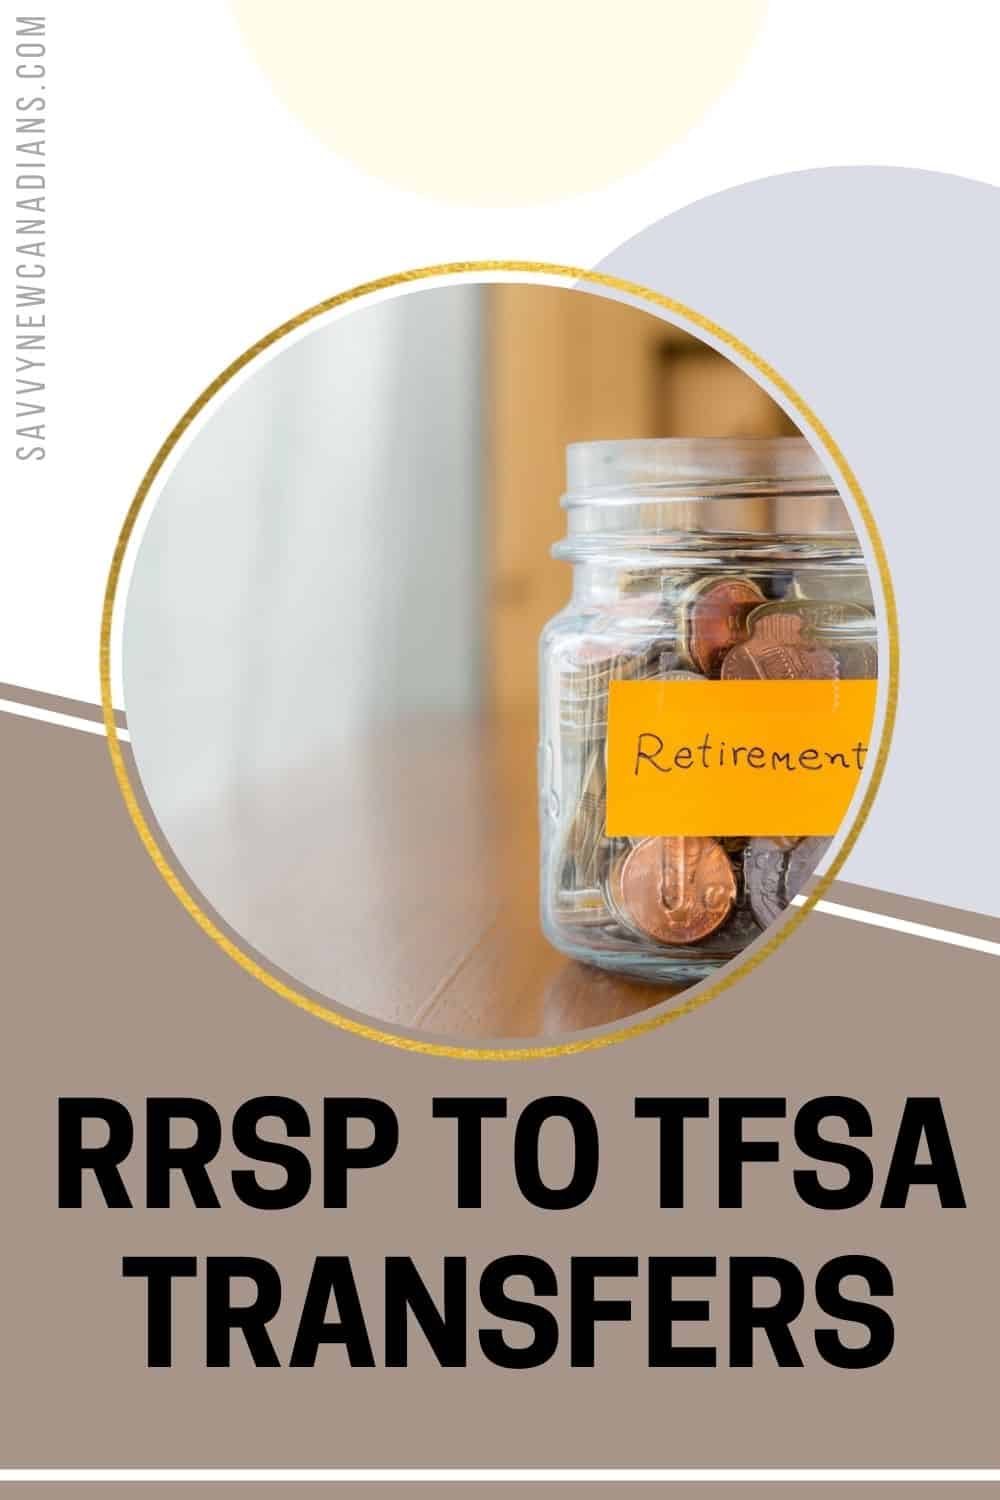 Can I Transfer RRSP Funds To A TFSA Without Penalty?